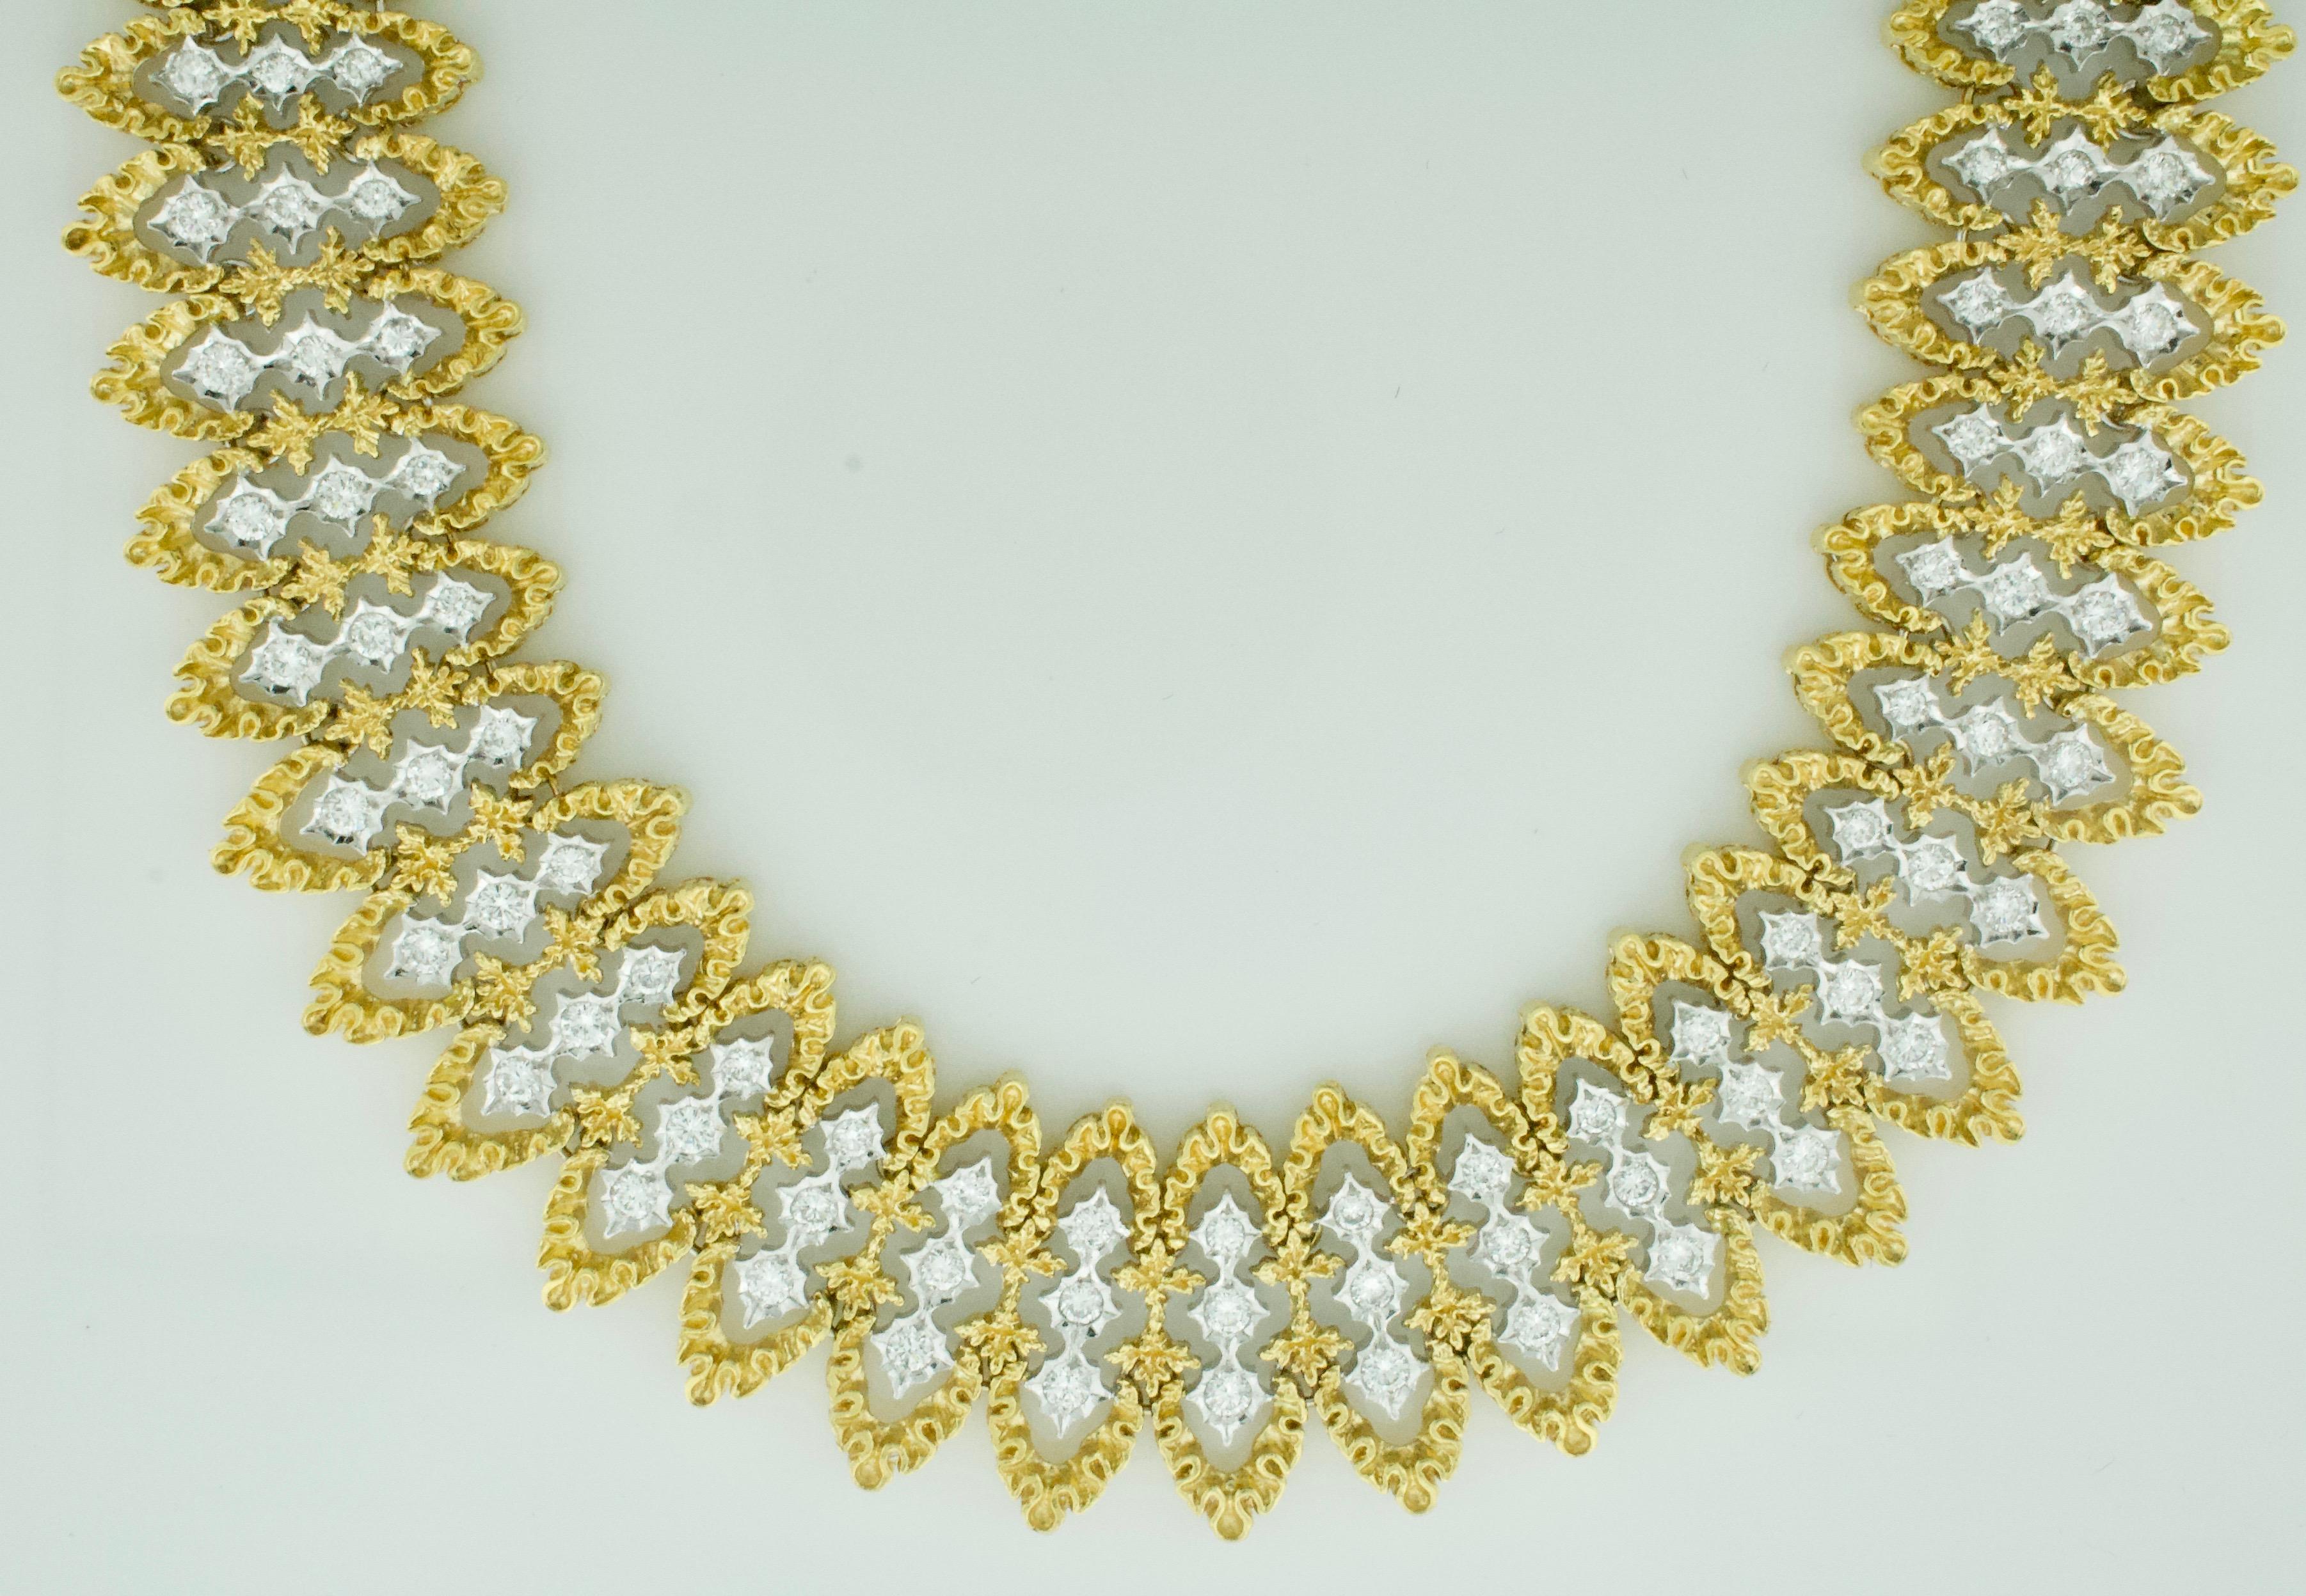 Impressive Heavy Diamond  Necklace in 18k Yellow Gold [5 Ounces+] 7.00 carats  In Excellent Condition For Sale In Wailea, HI